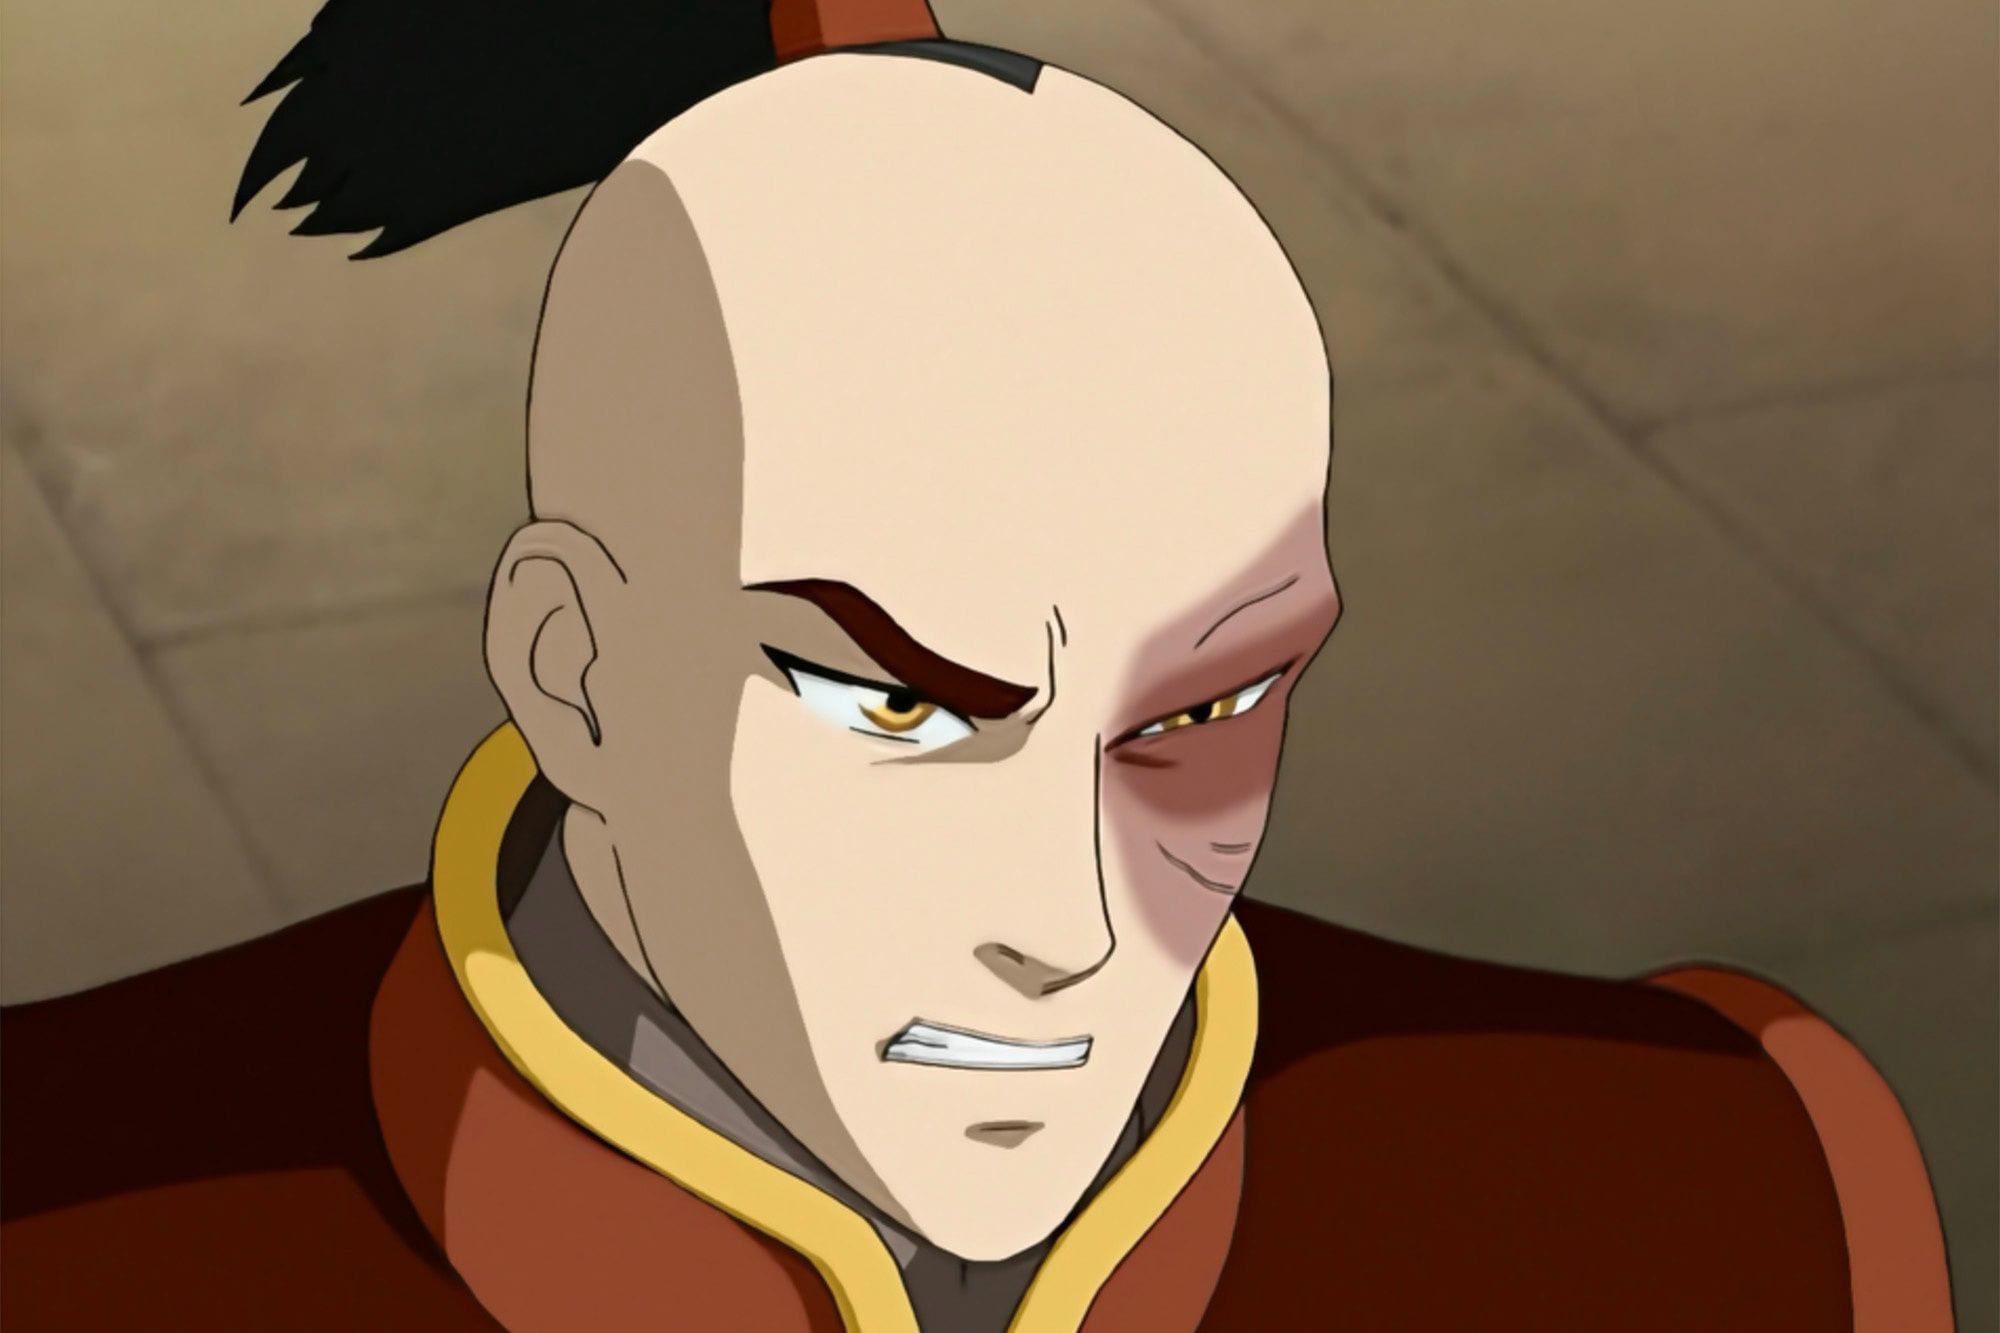 ‘Avatar: The Last Airbender’ Nudges Out Conscience in Our Time of Crises